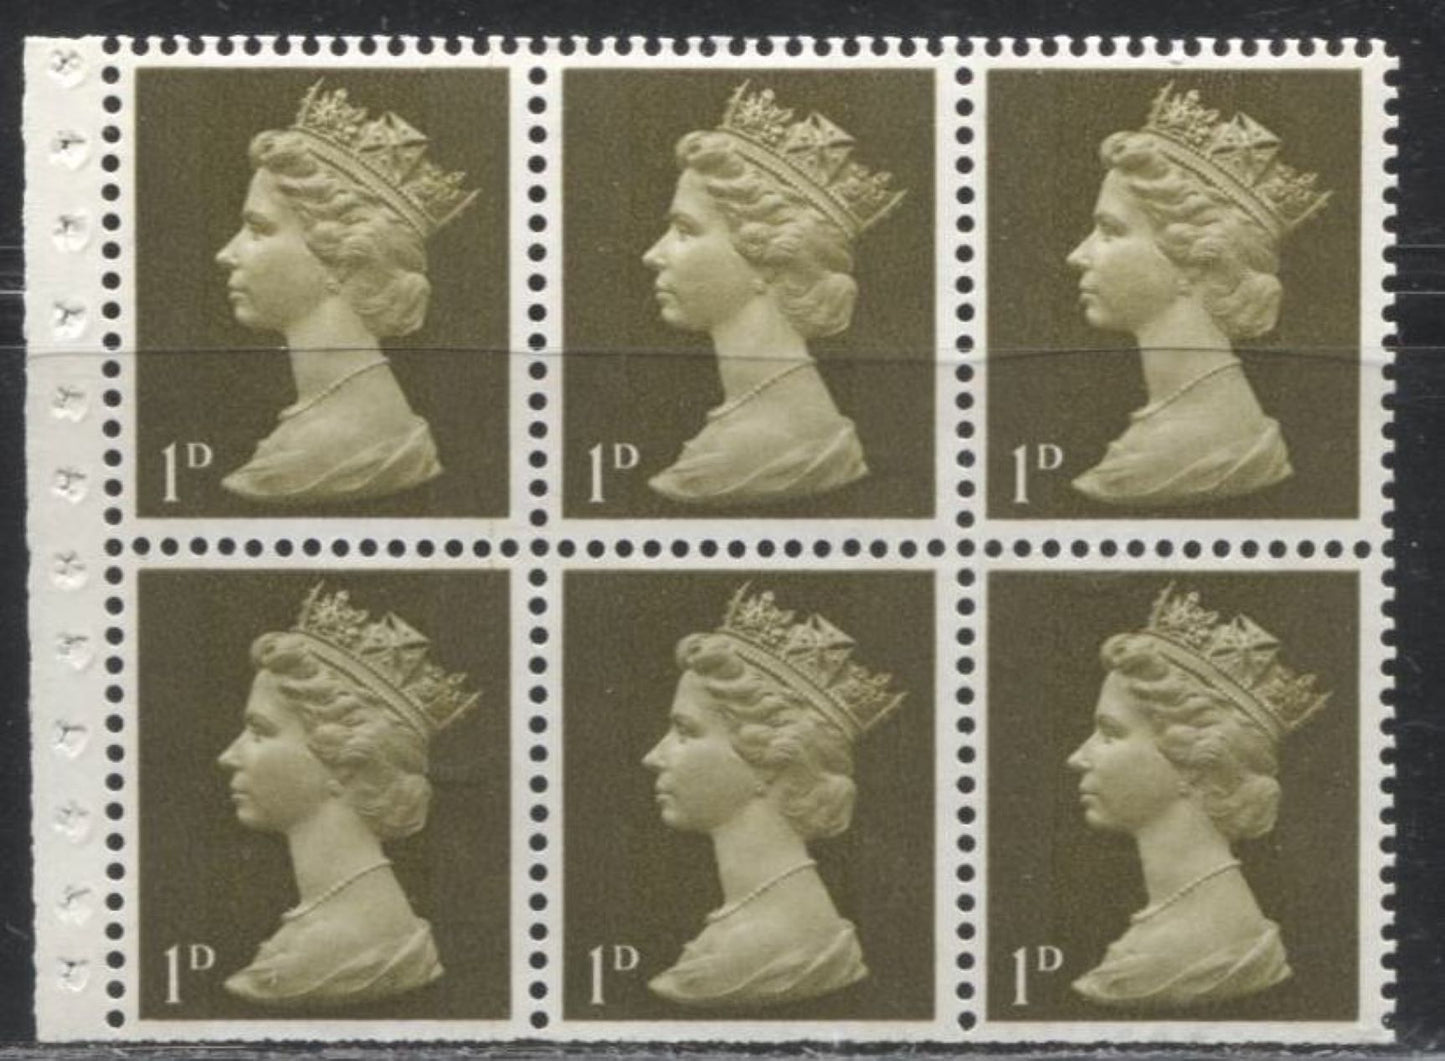 Great Britain SG#LP55 4/6d- Black on Grey Blue 1967-1971 Pre-Decimal Machin Heads Issue, A Booklet From January 1970, Various Fluorescence Levels For Interleaving Pages, Low Fluorescent "Mauretania" Cover on Front and High Fluorescent Back Cover